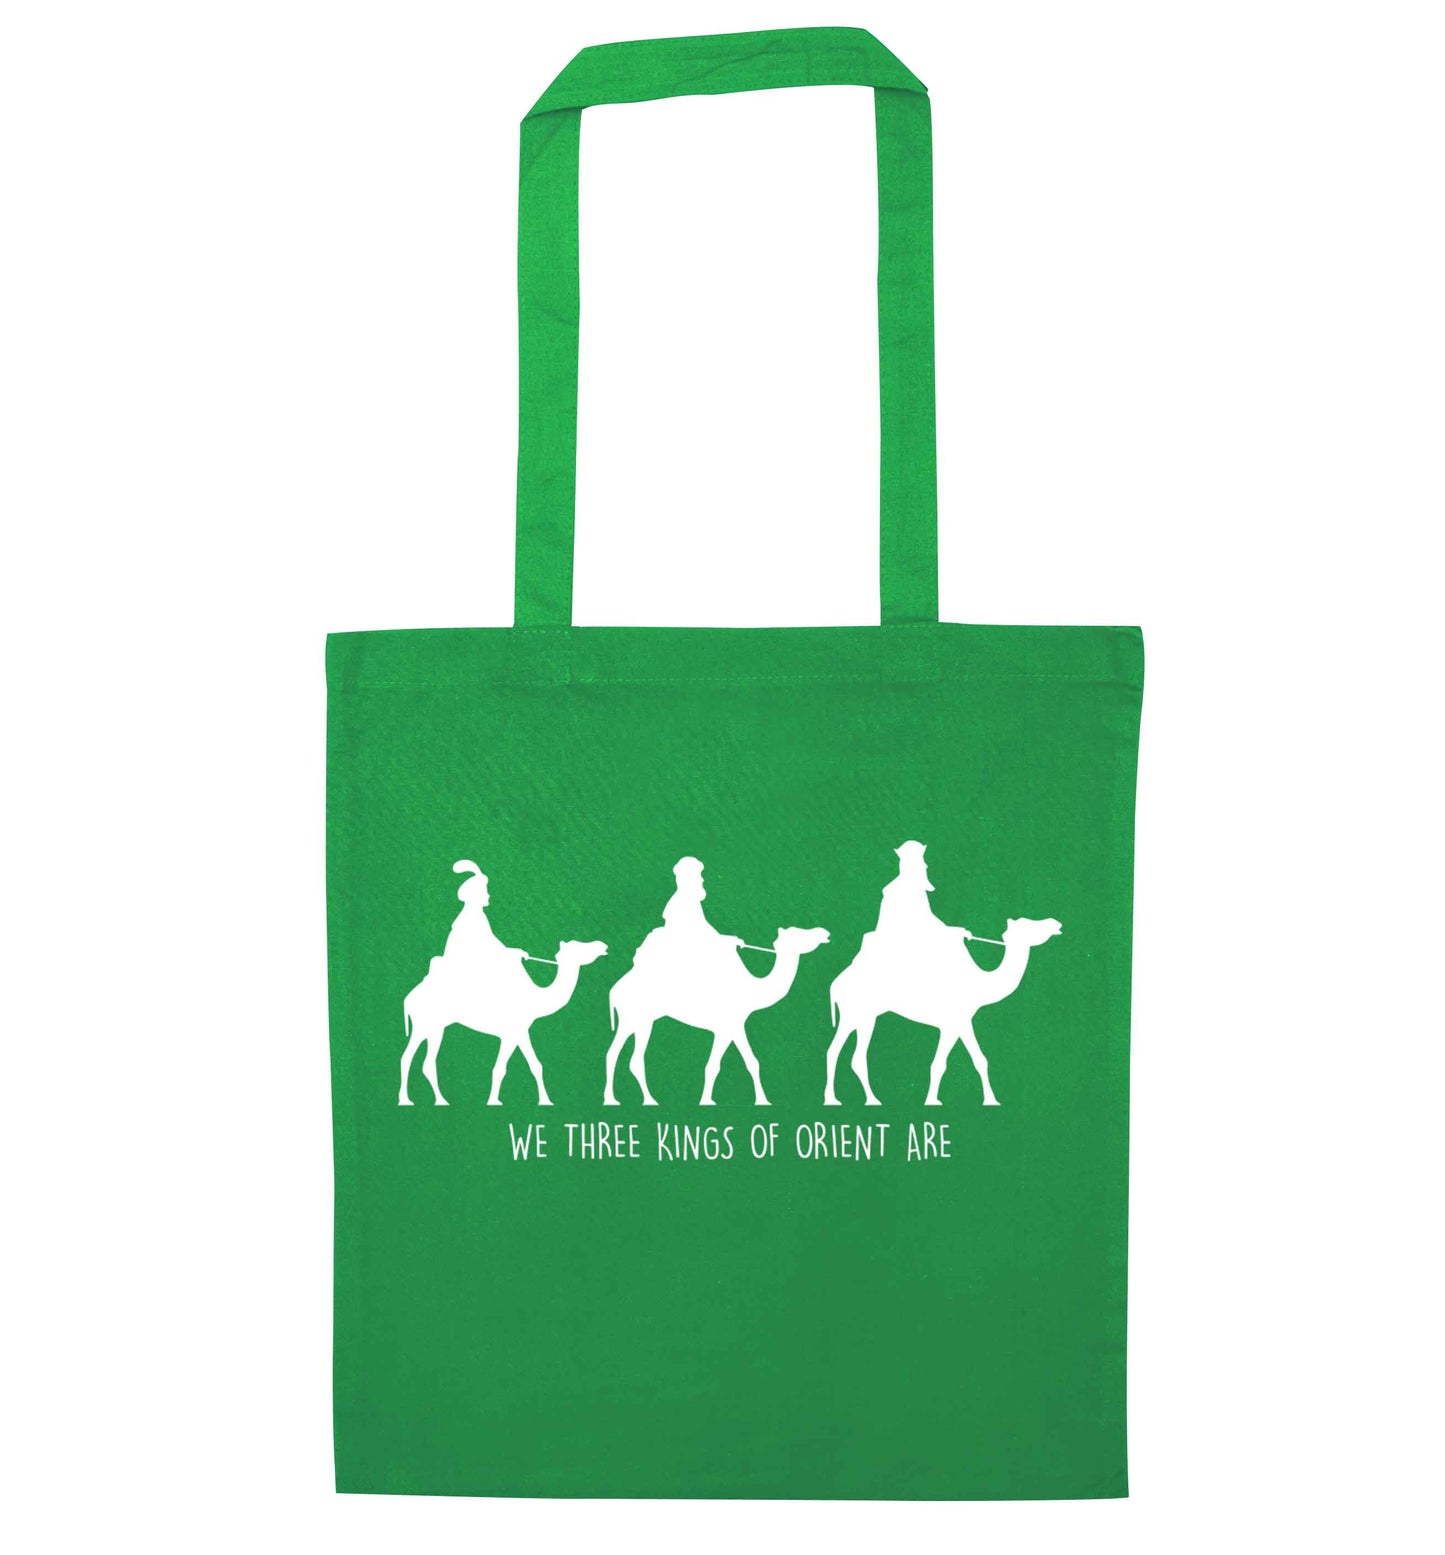 We three kings of orient are green tote bag